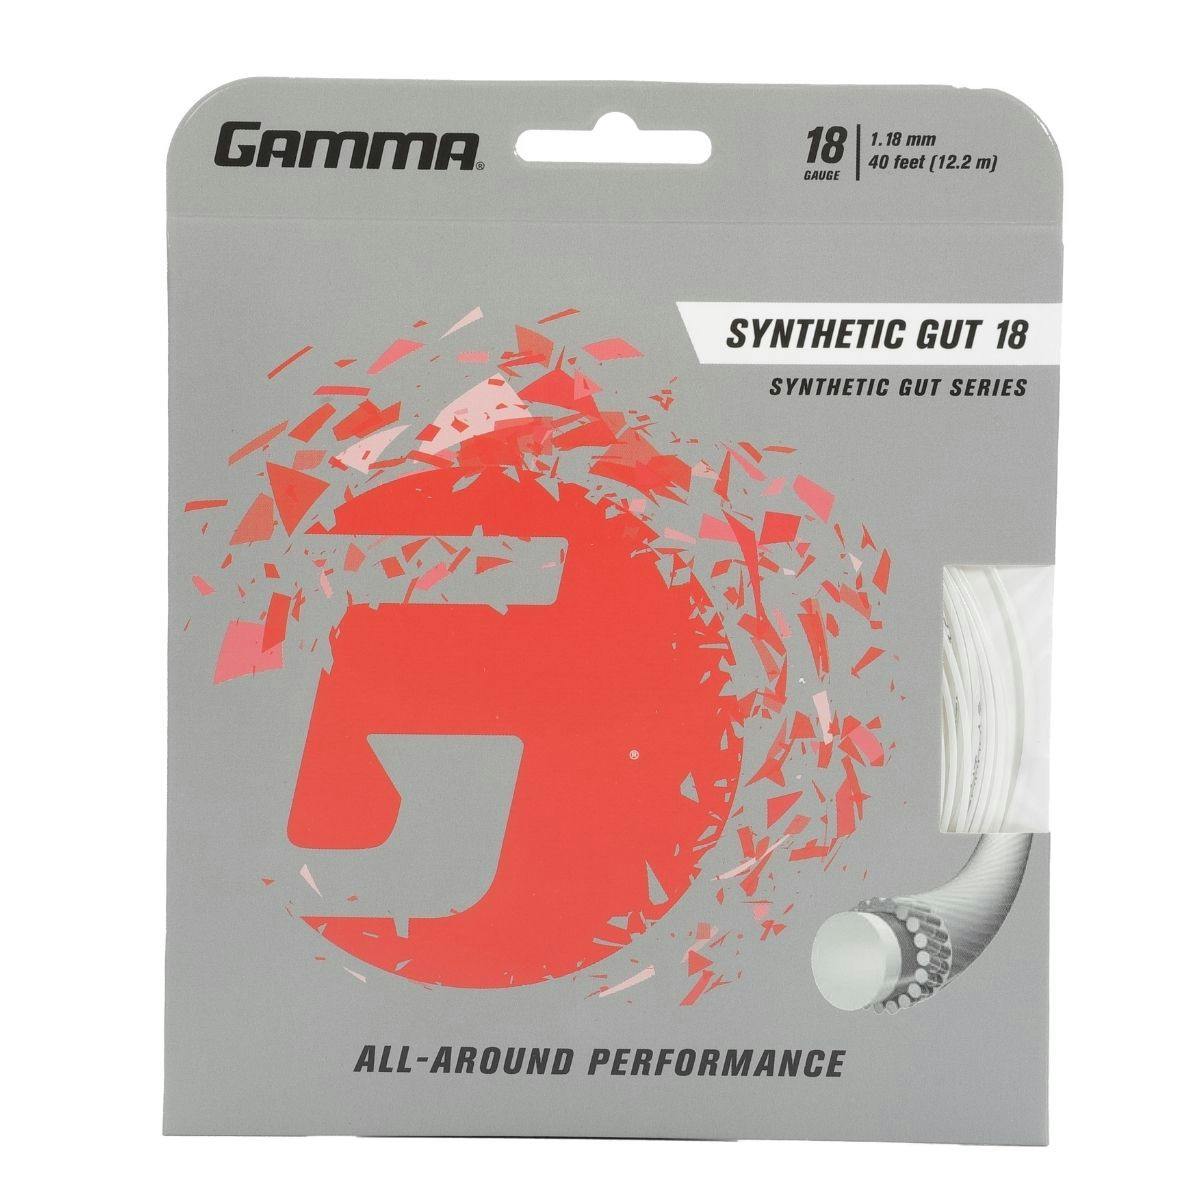 Gamma Synthetic Gut String · 17g · White